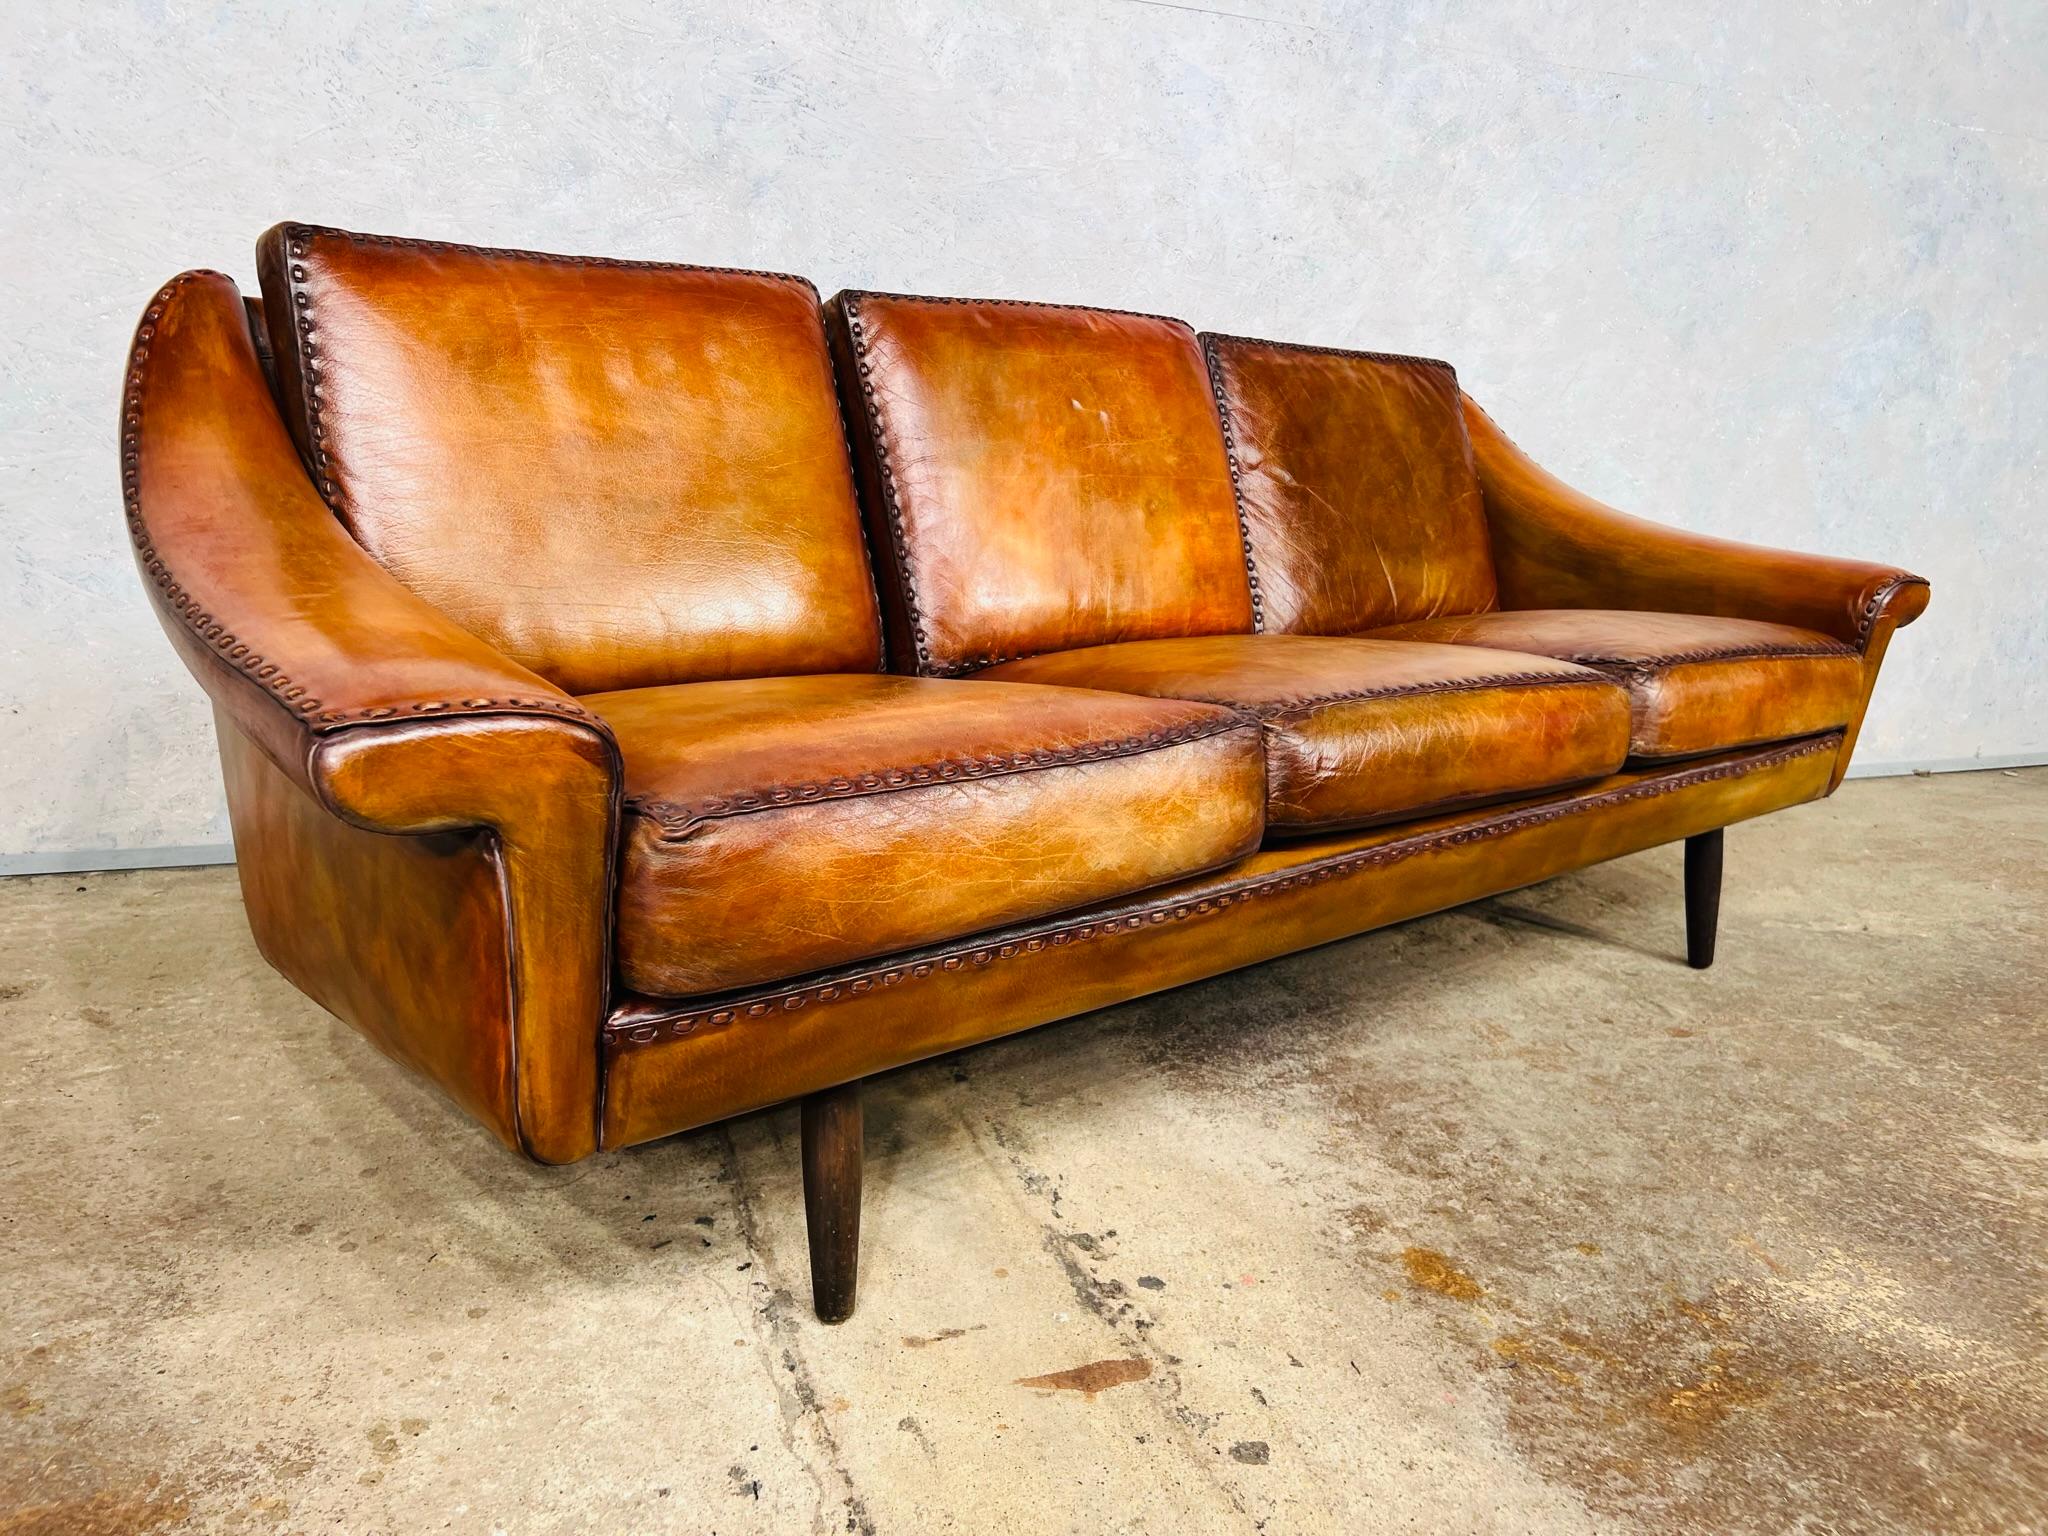 Matador Leather 3 Seater Sofa by Aage Christiansen for Eran 1960s #642 For Sale 6